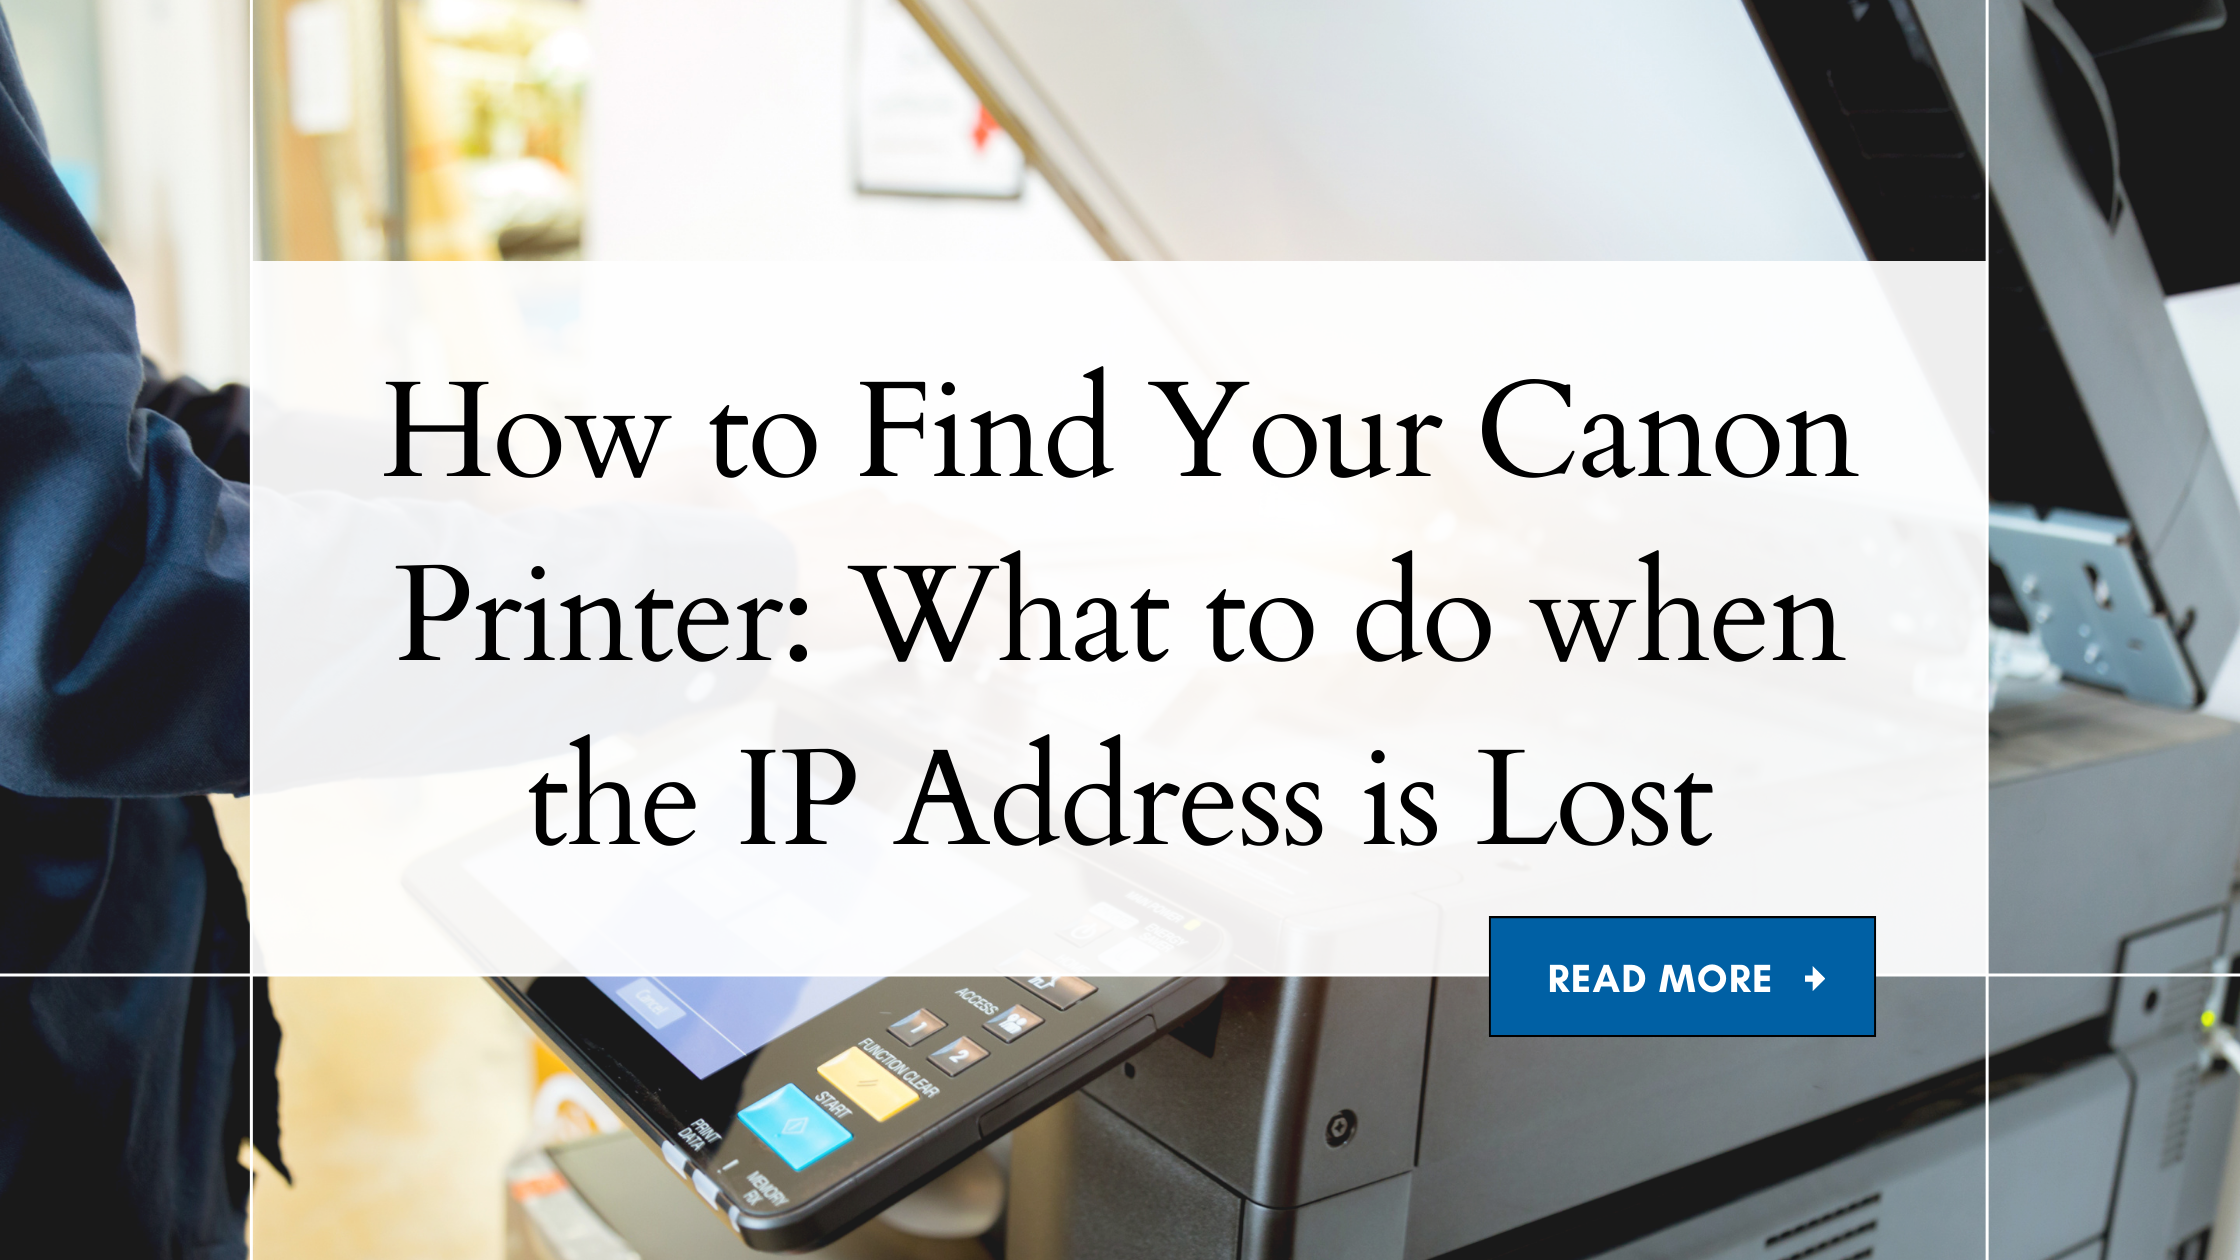 How to Find Your Canon Printer: What to do when the IP Address is Lost